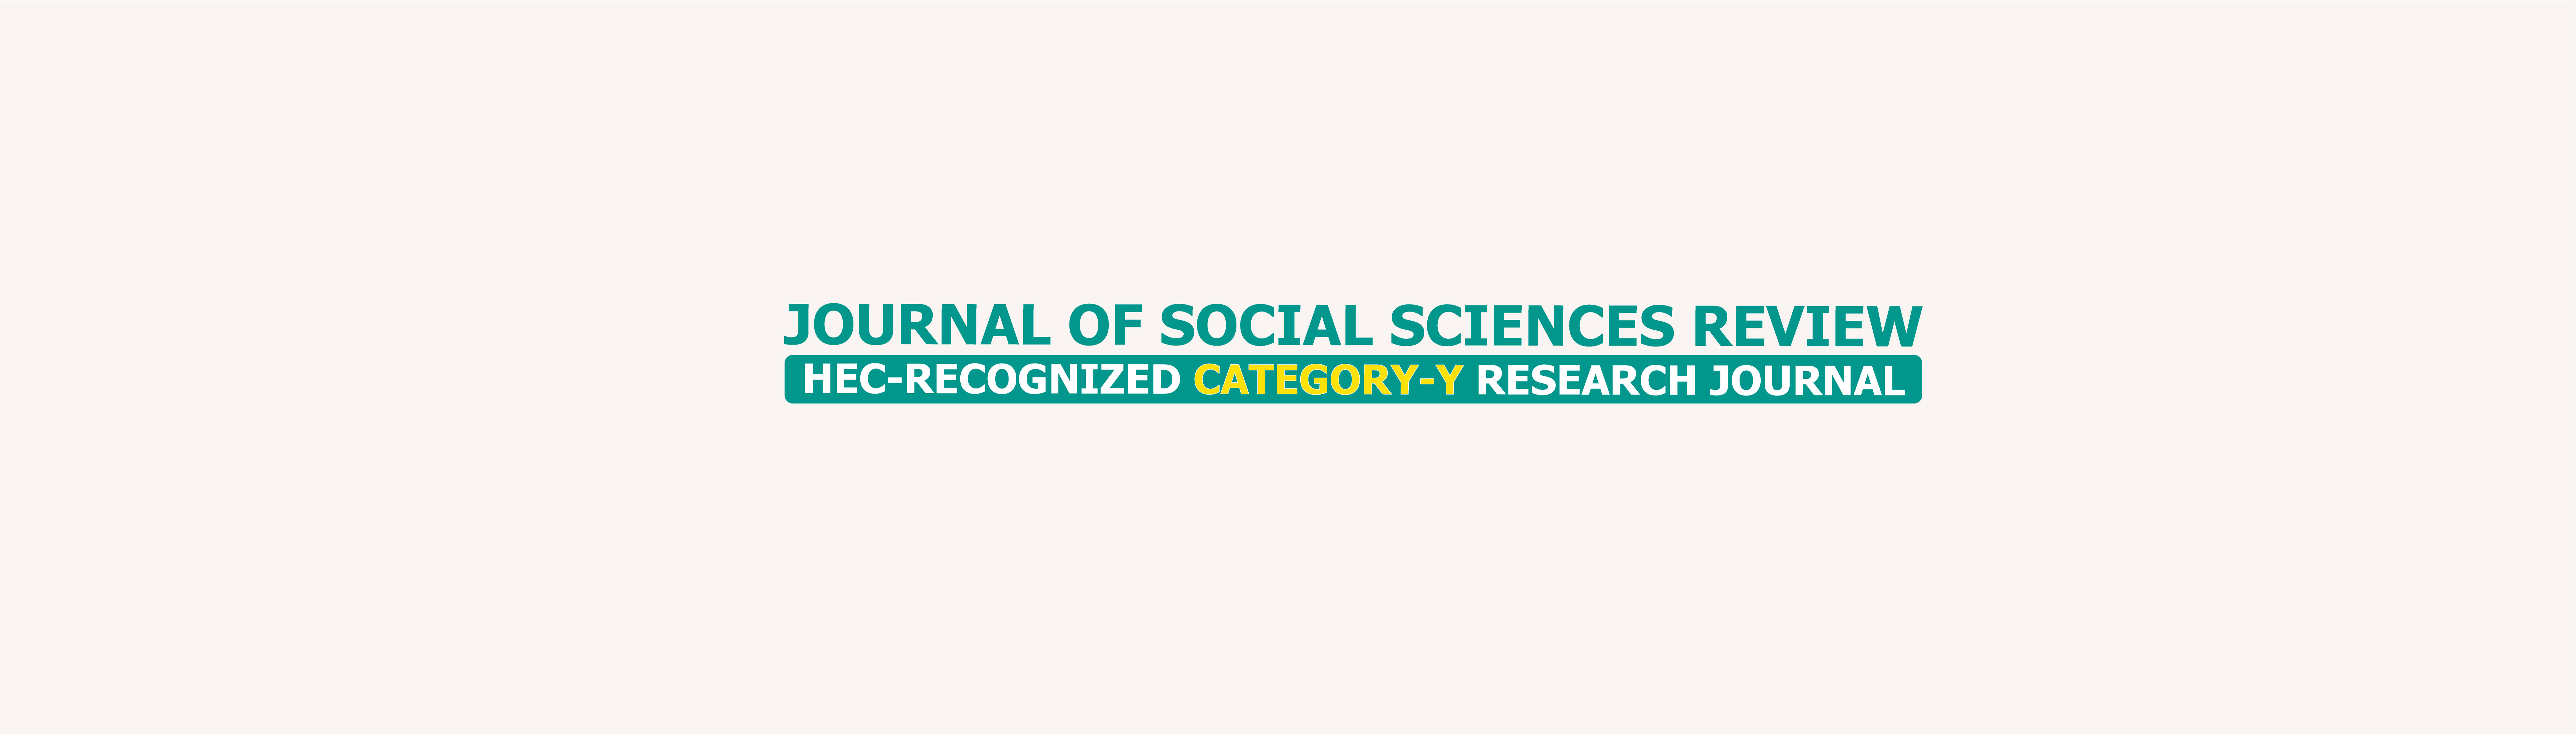 Journal of Social Sciences Review